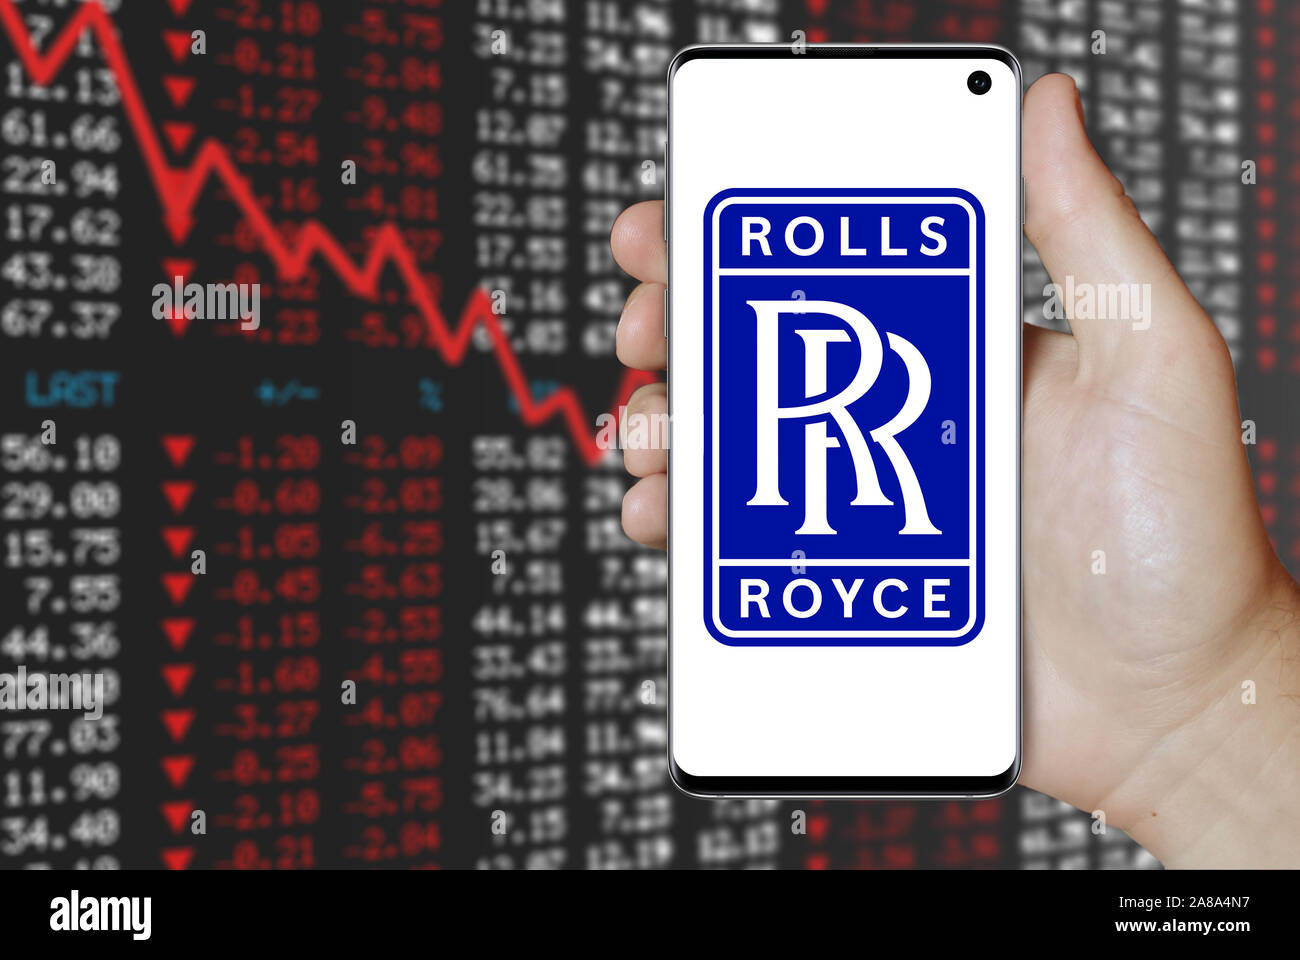 Rolls Royce Names This PE Partner As New Chief From January Analysts Give  Thumbs Up